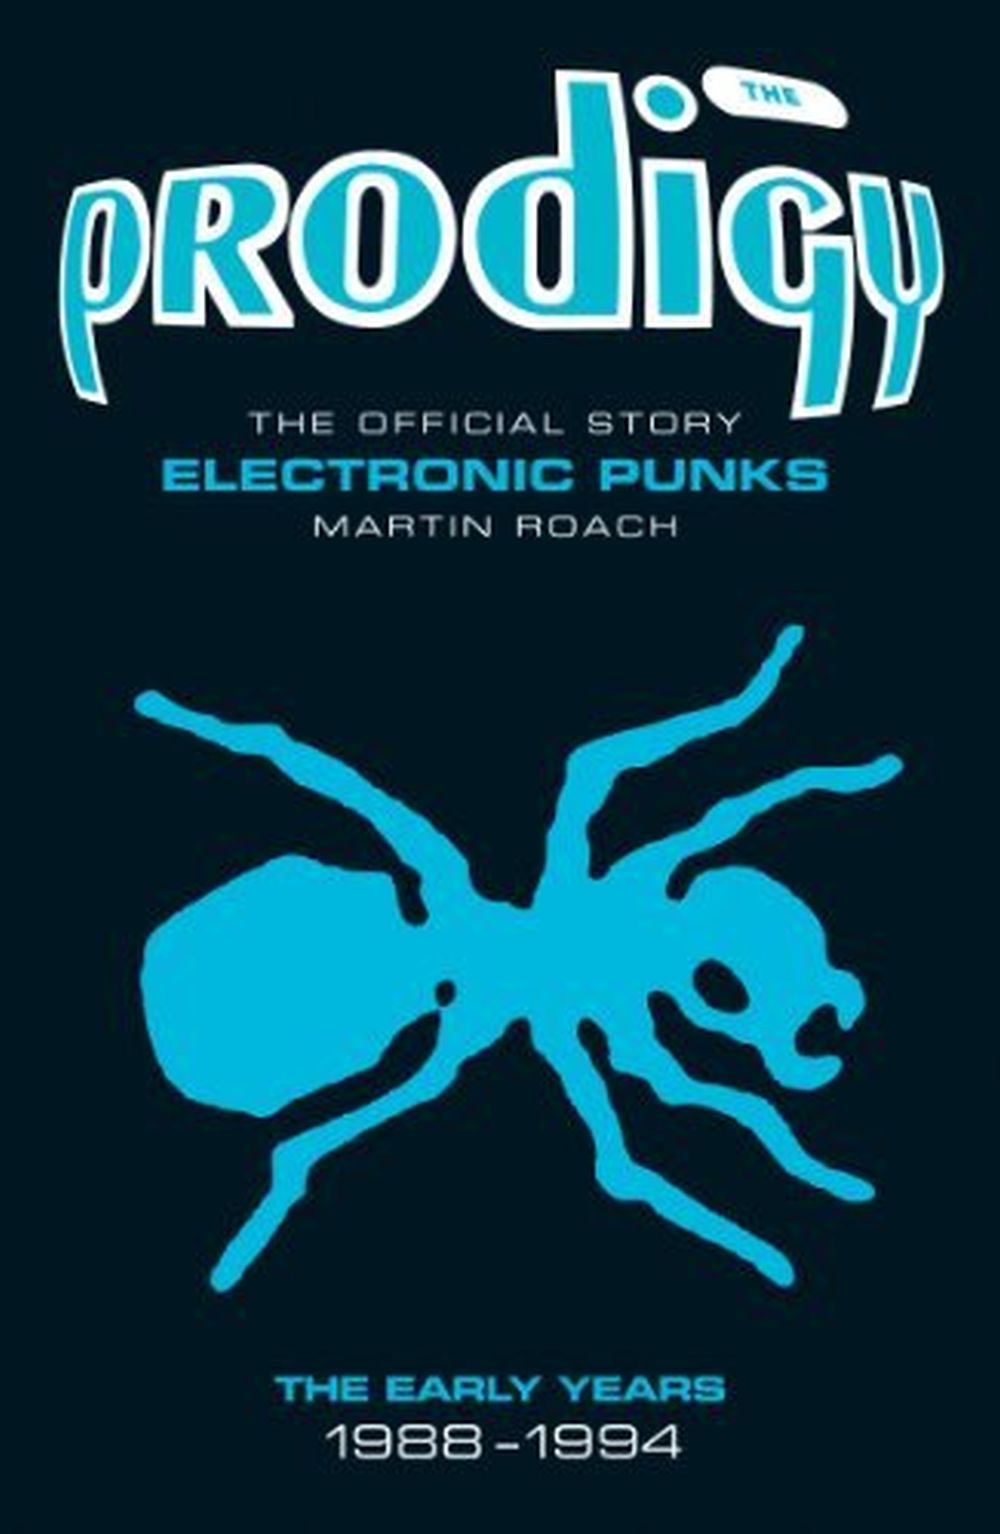 Prodigy - Roach, Martin - Electronic Punks: The Official Story - The Early Years 1988-1994 - Book - New